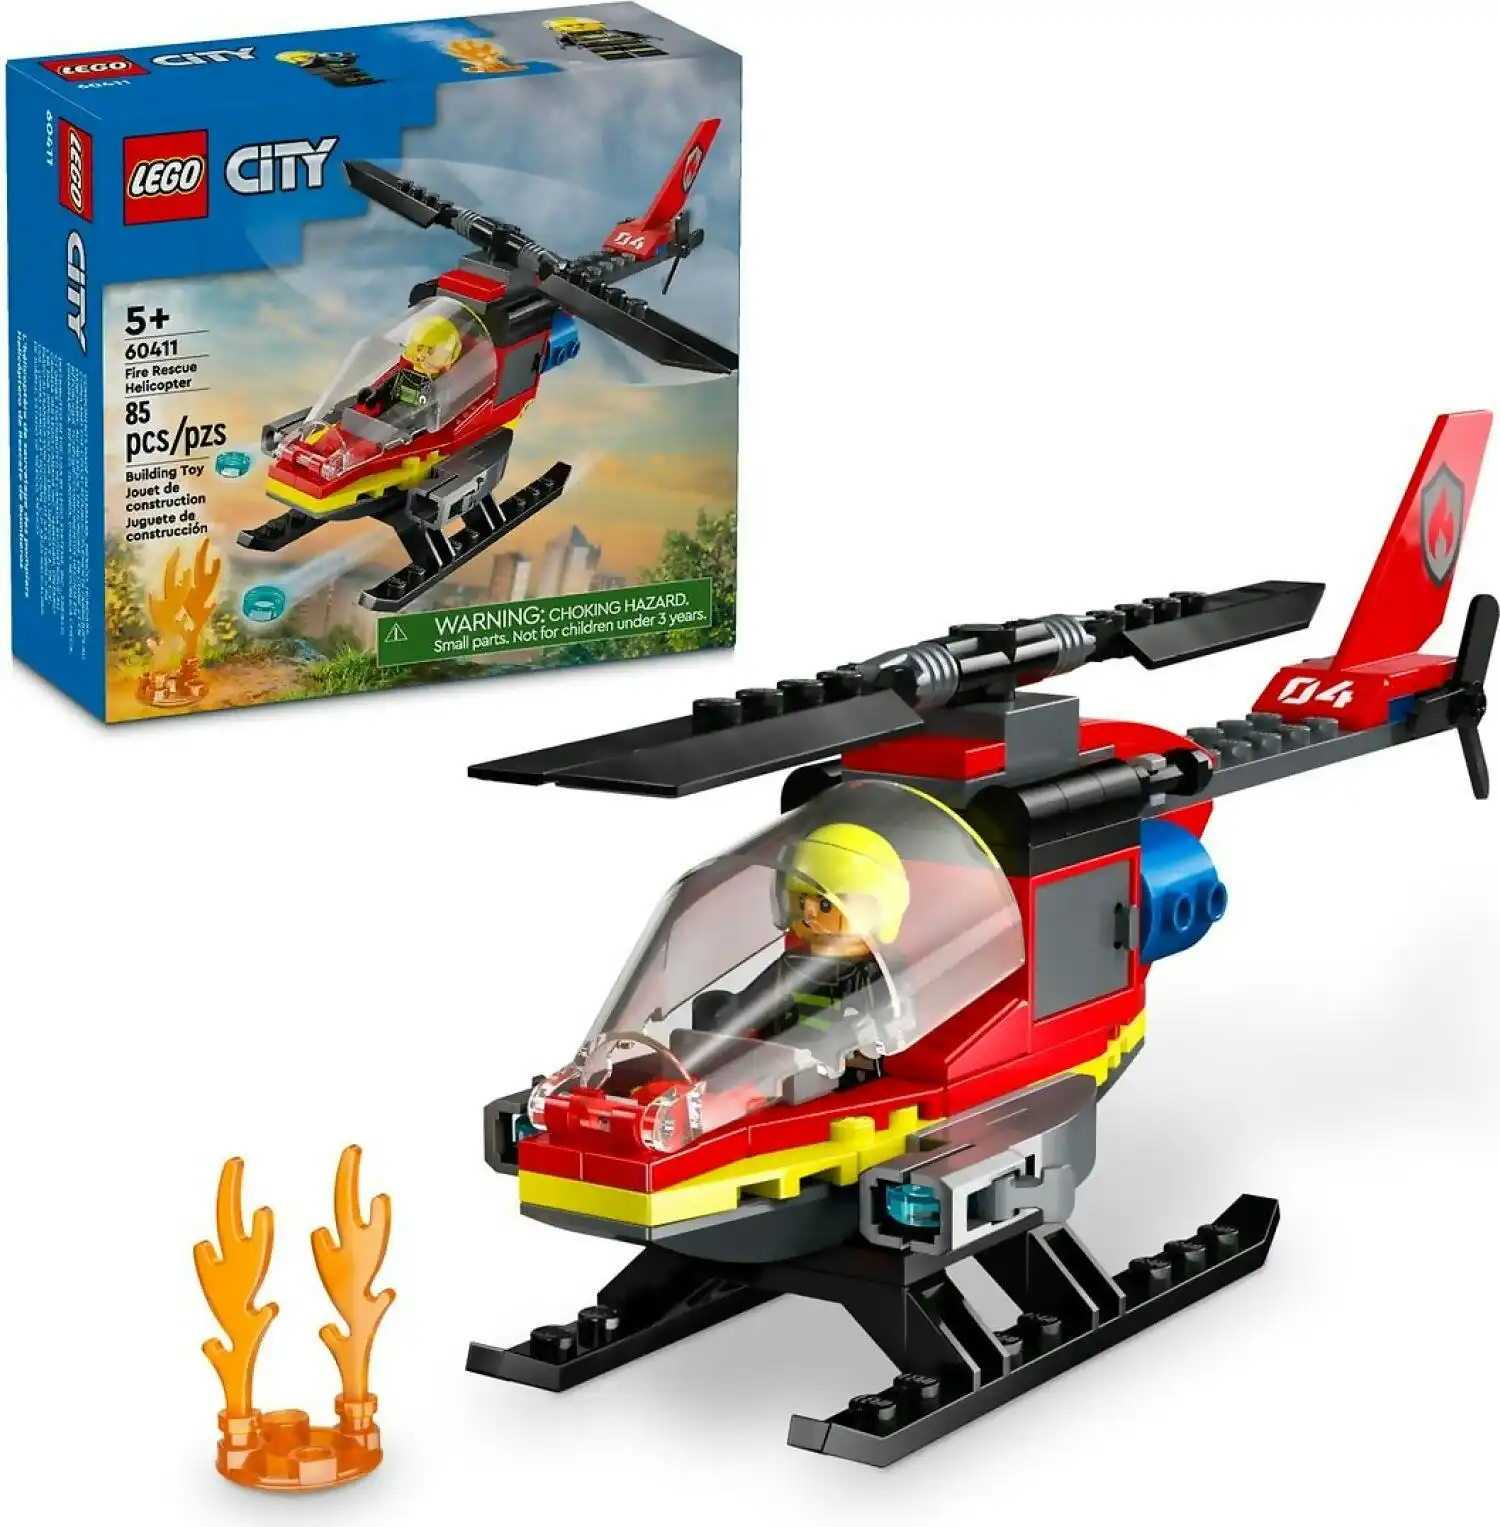 LEGO 60411 Fire Rescue Helicopter - City